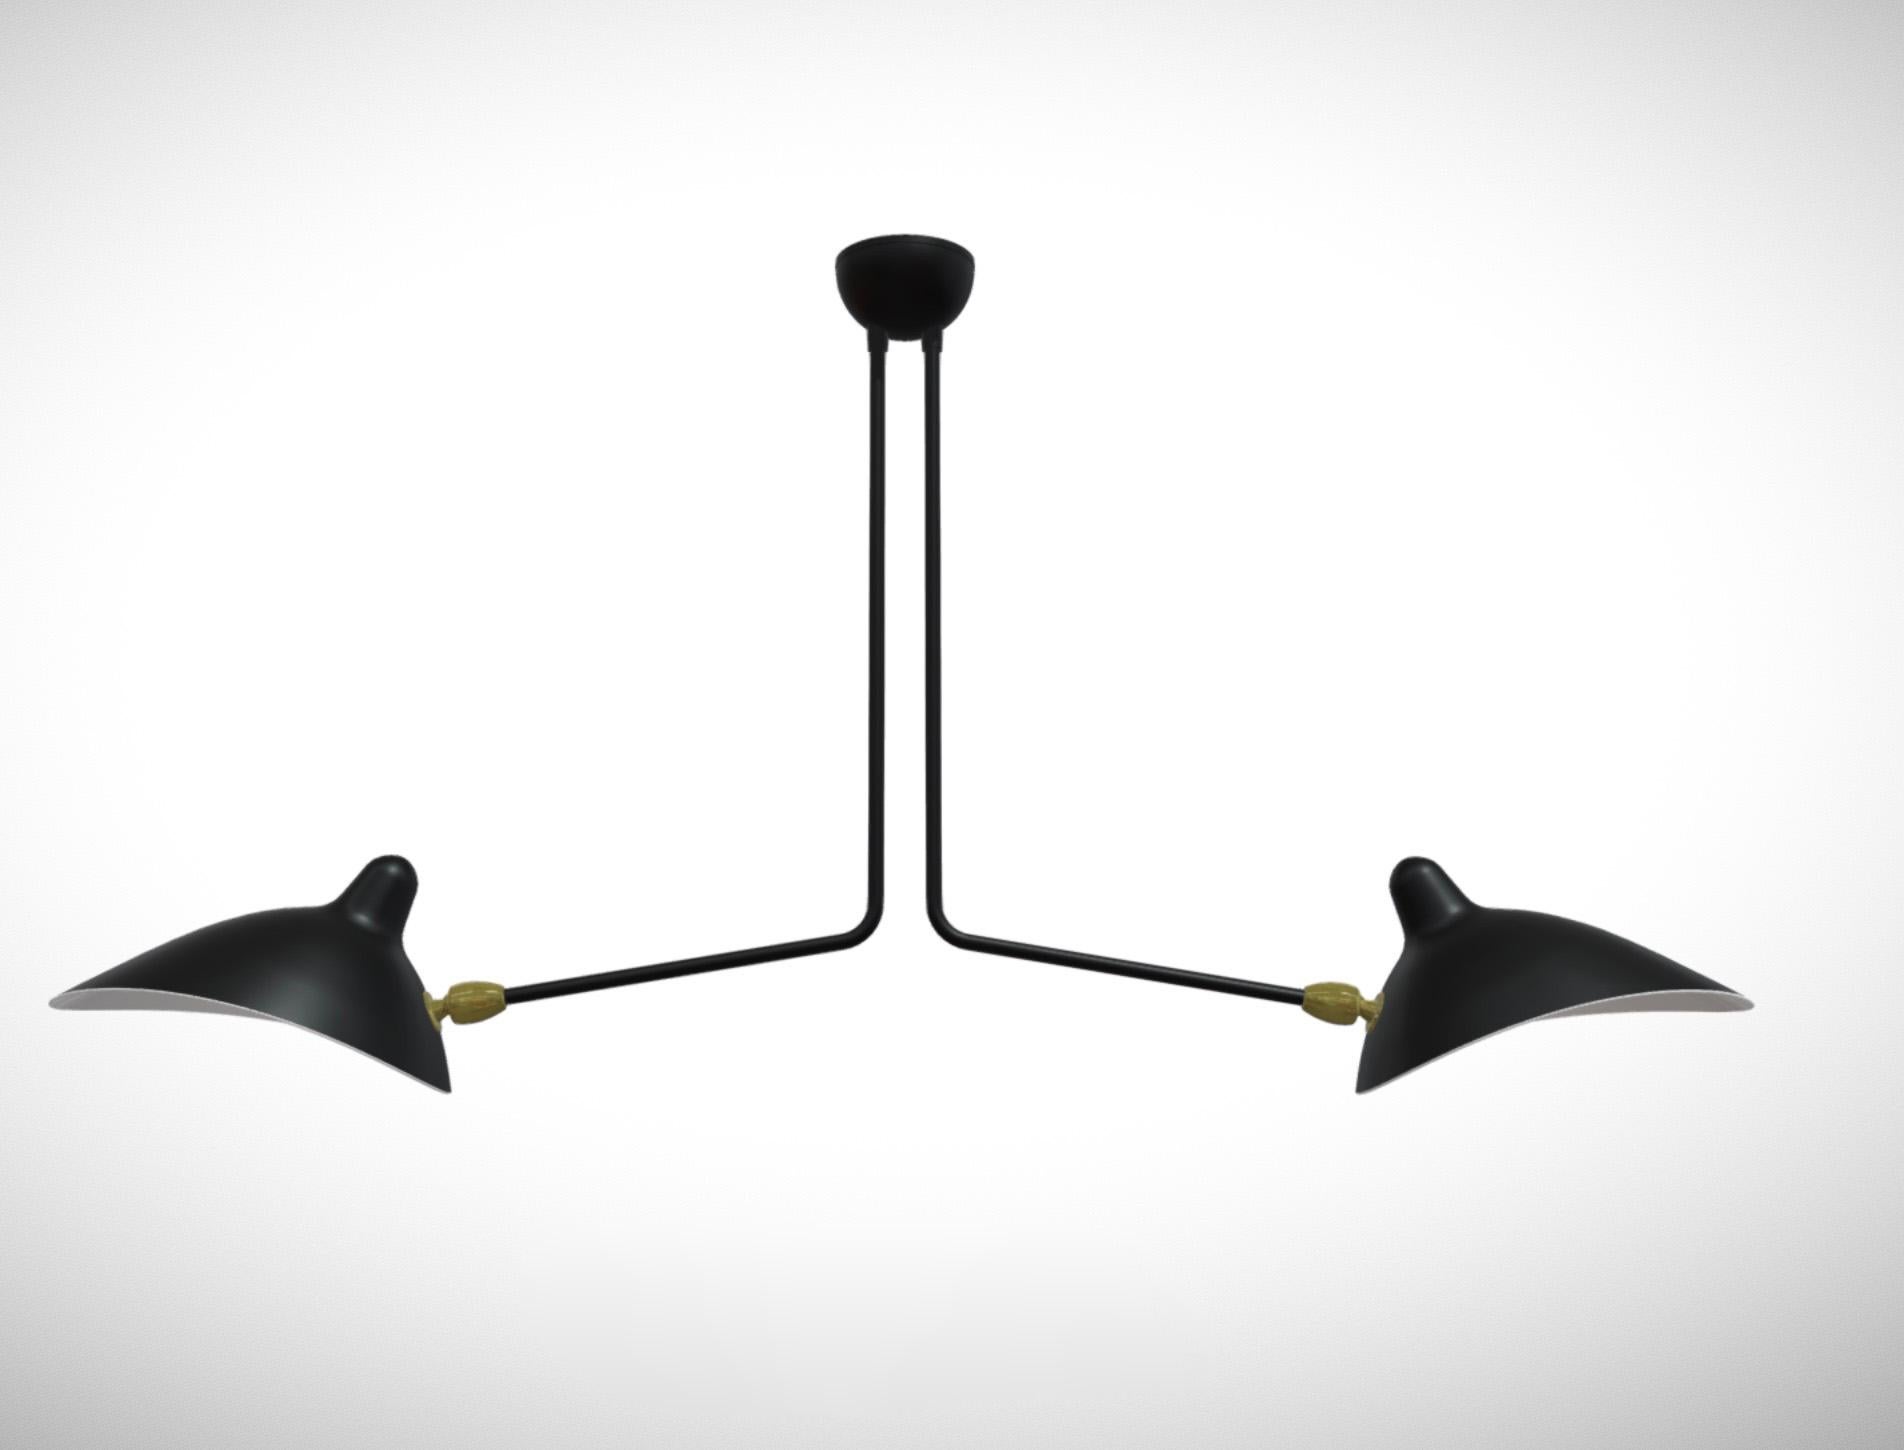 Painted Serge Mouille 'Plafonnier 2 Bras Fixes' Ceiling Lamp in Black For Sale